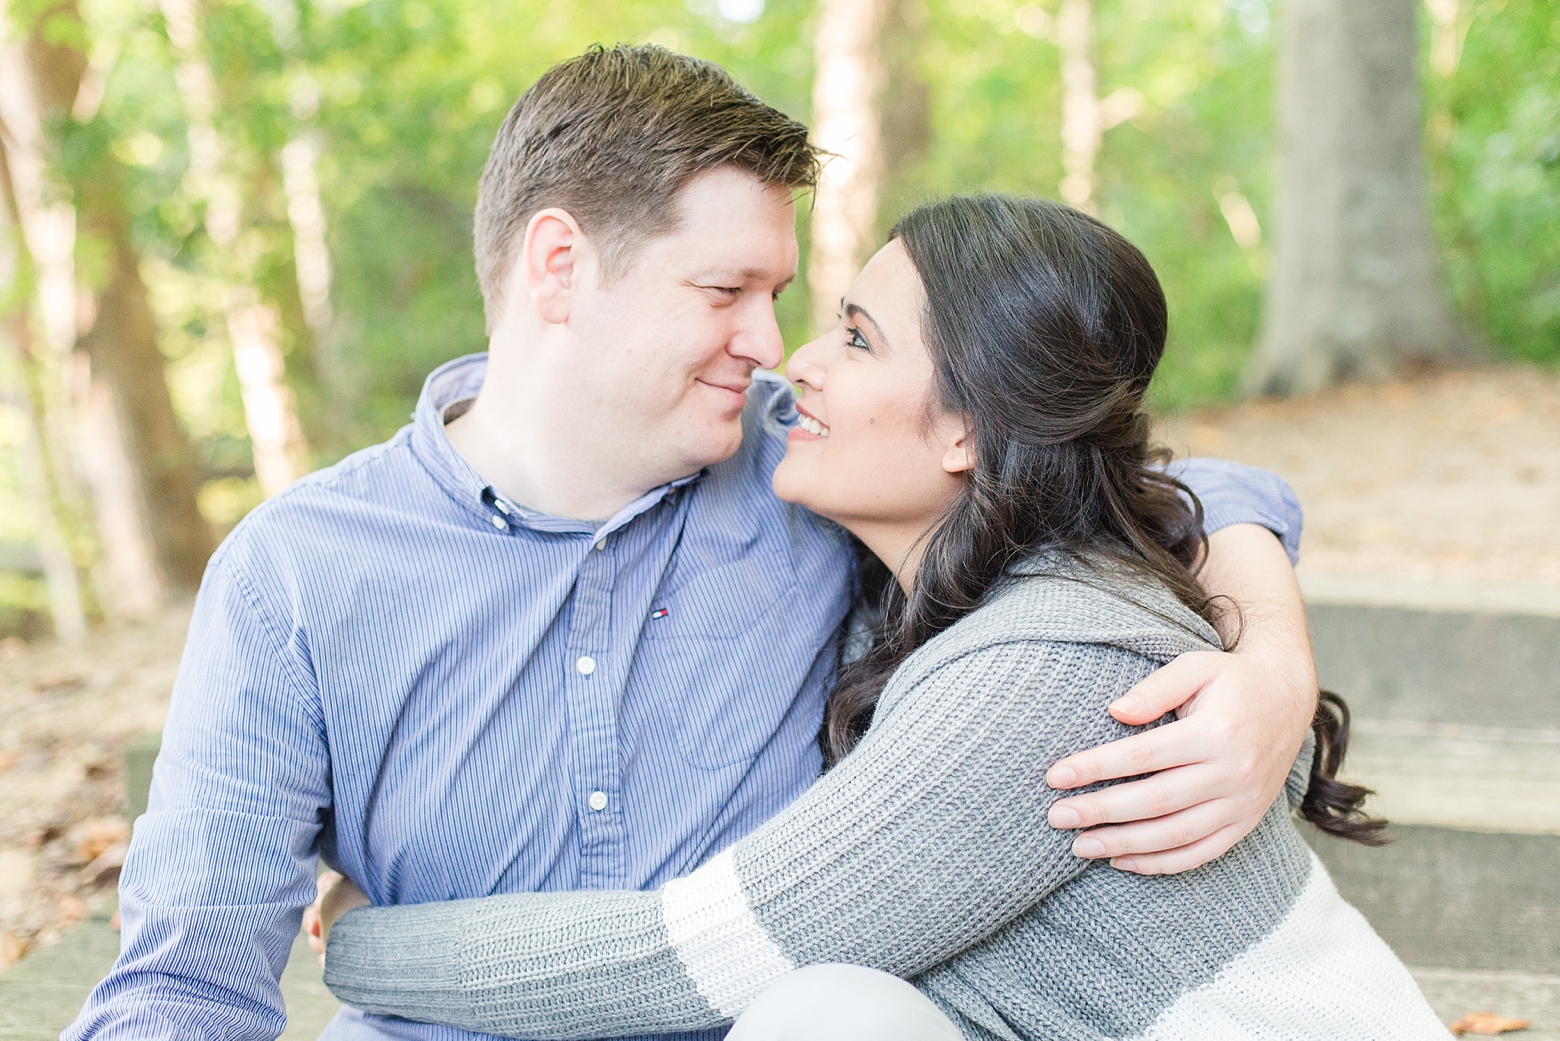 Williamsburg Engagement Photography by Angie McPherson Photography